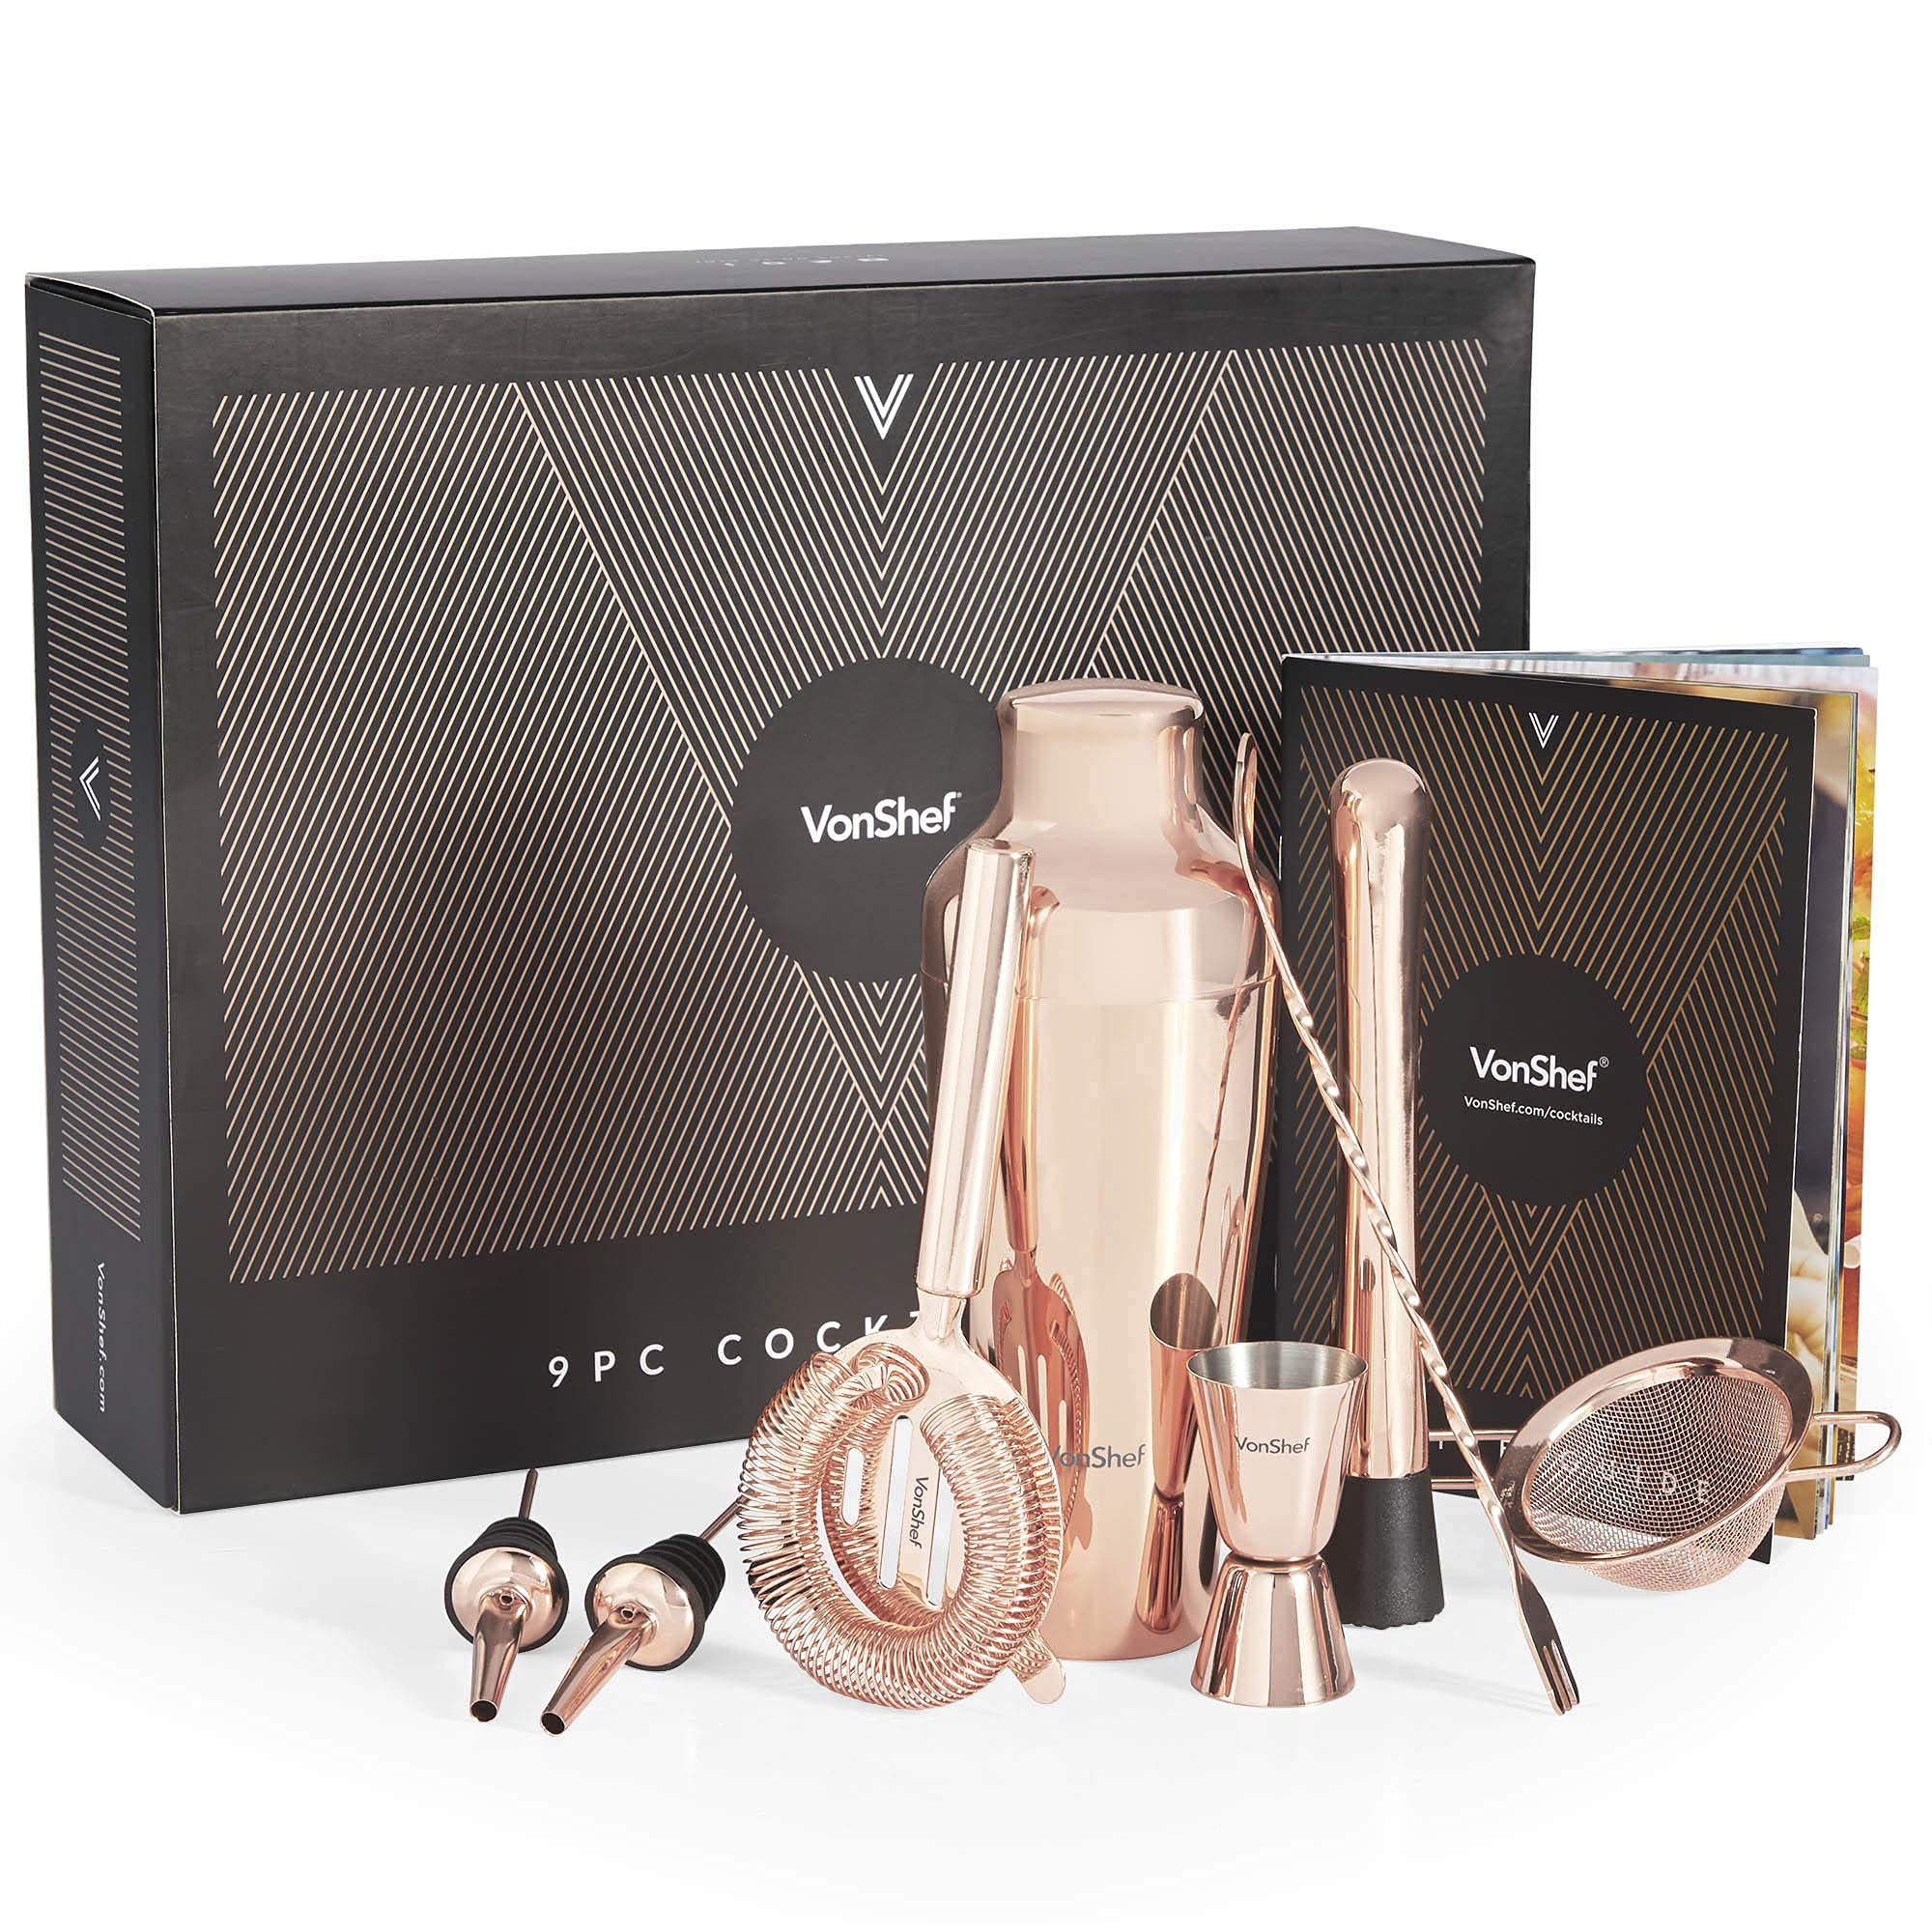 VonShef Parisian Cocktail Shaker Barware Set in Gift Box with Recipe Guide, Cocktail Strainers, Twisted Bar Spoon, Jigger, Muddler and Pourers, 9 Piece Set, 17oz (Rose Gold)